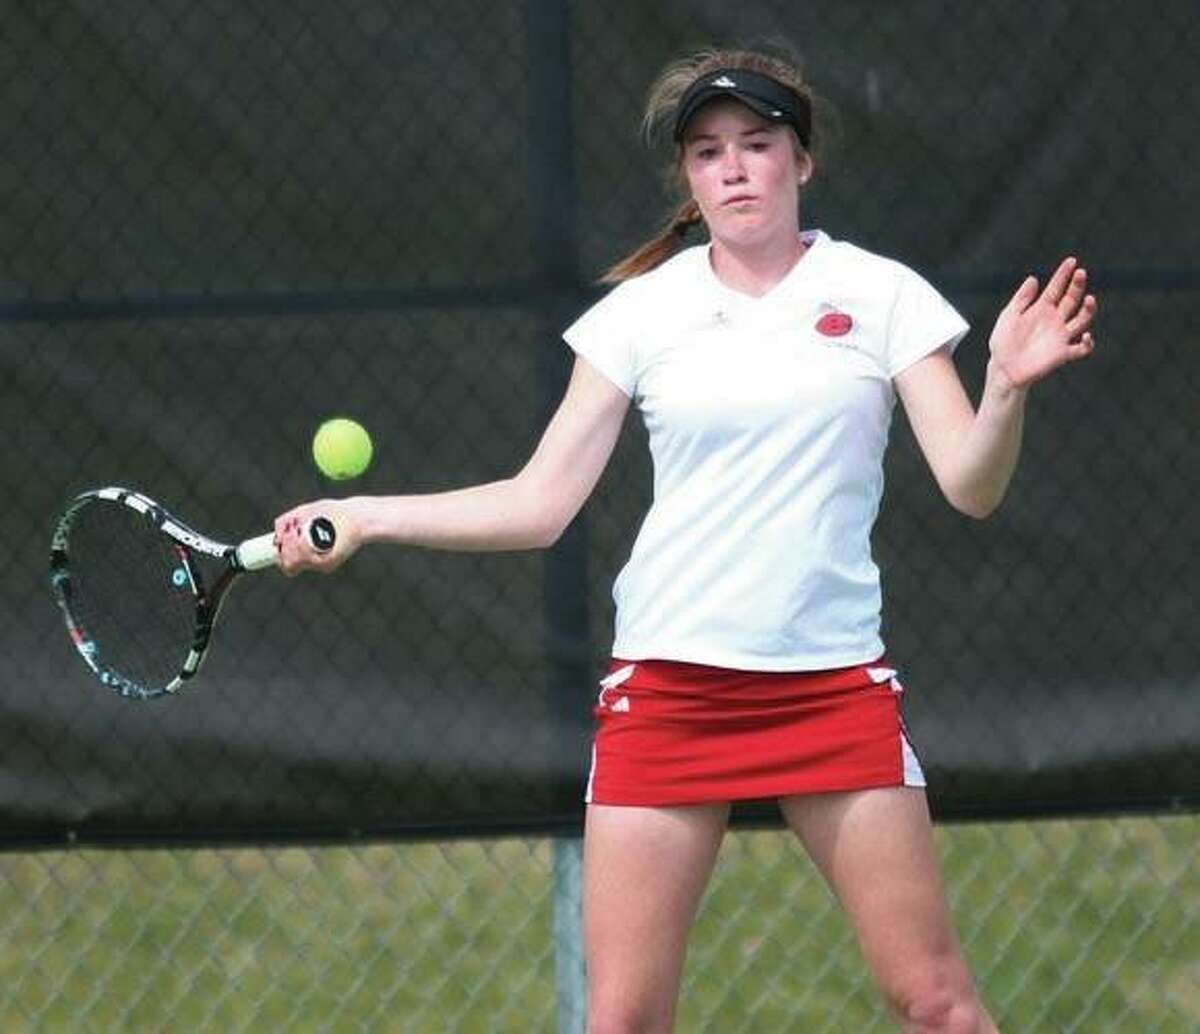 SIUE’s Callaghan Adams, a freshman from Edwardsville, won the decisive singles match that gave the Cougars a 4-3 Ohio Valley Conference dual victory over Eastern Kentucky.